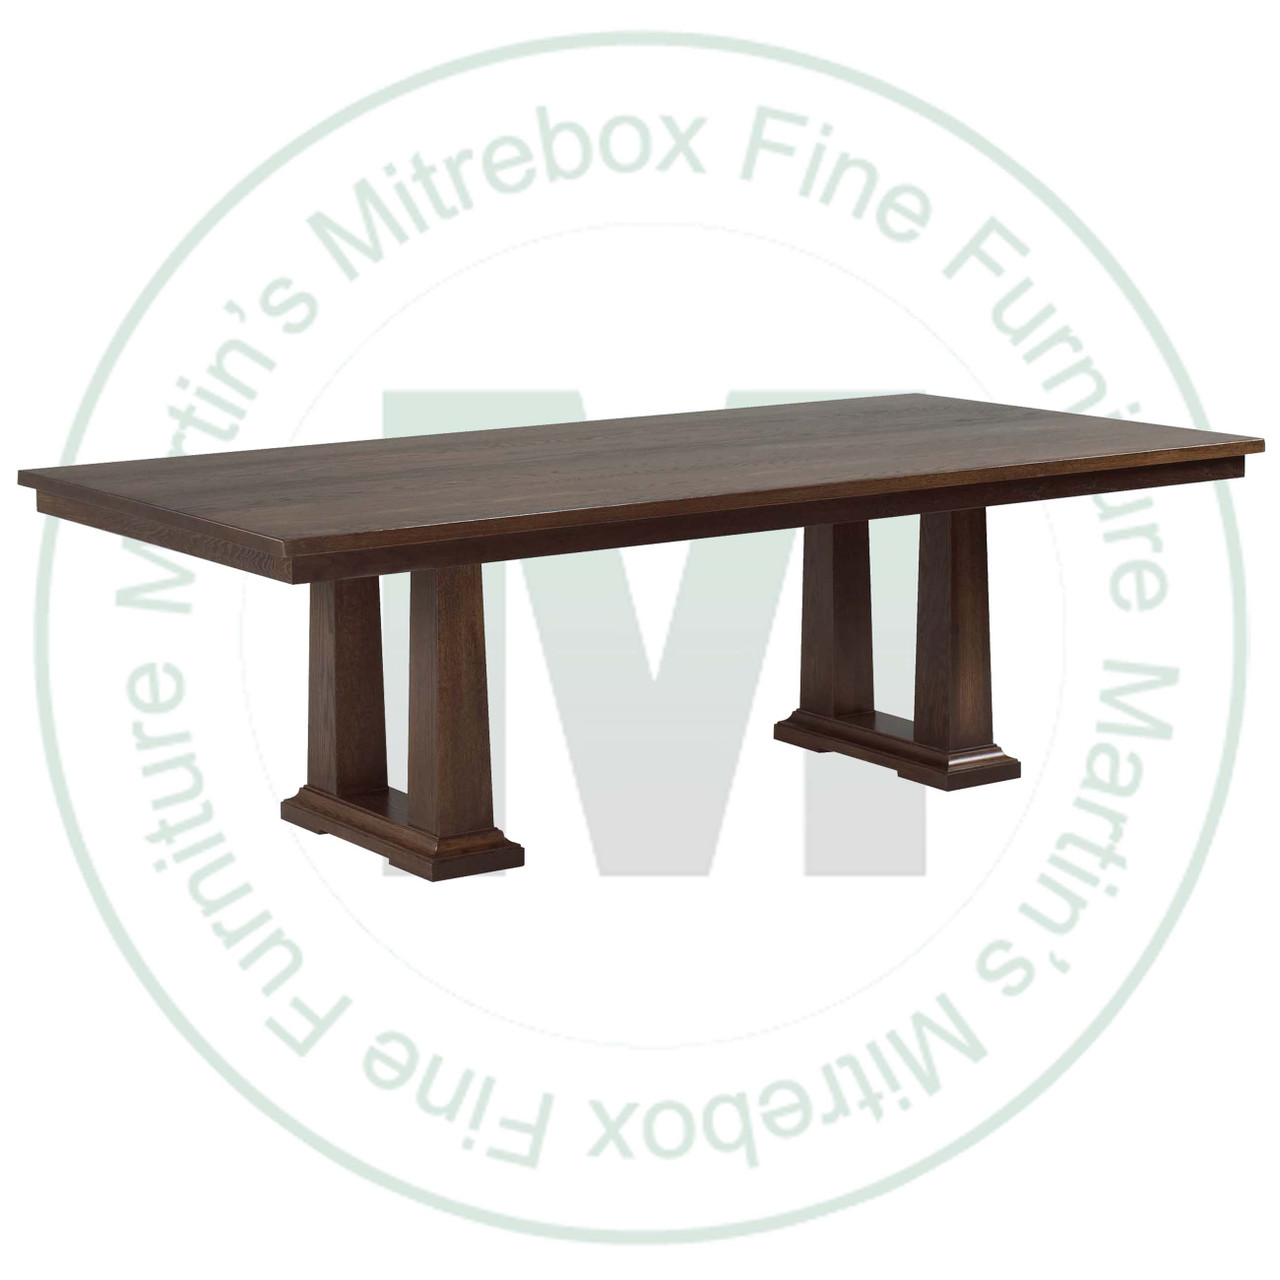 Oak Acropolis Extension Double Pedestal Table 54''D x 96''W x 30''H With 2 - 12'' Leaves Table Has 1.75'' Thick Top